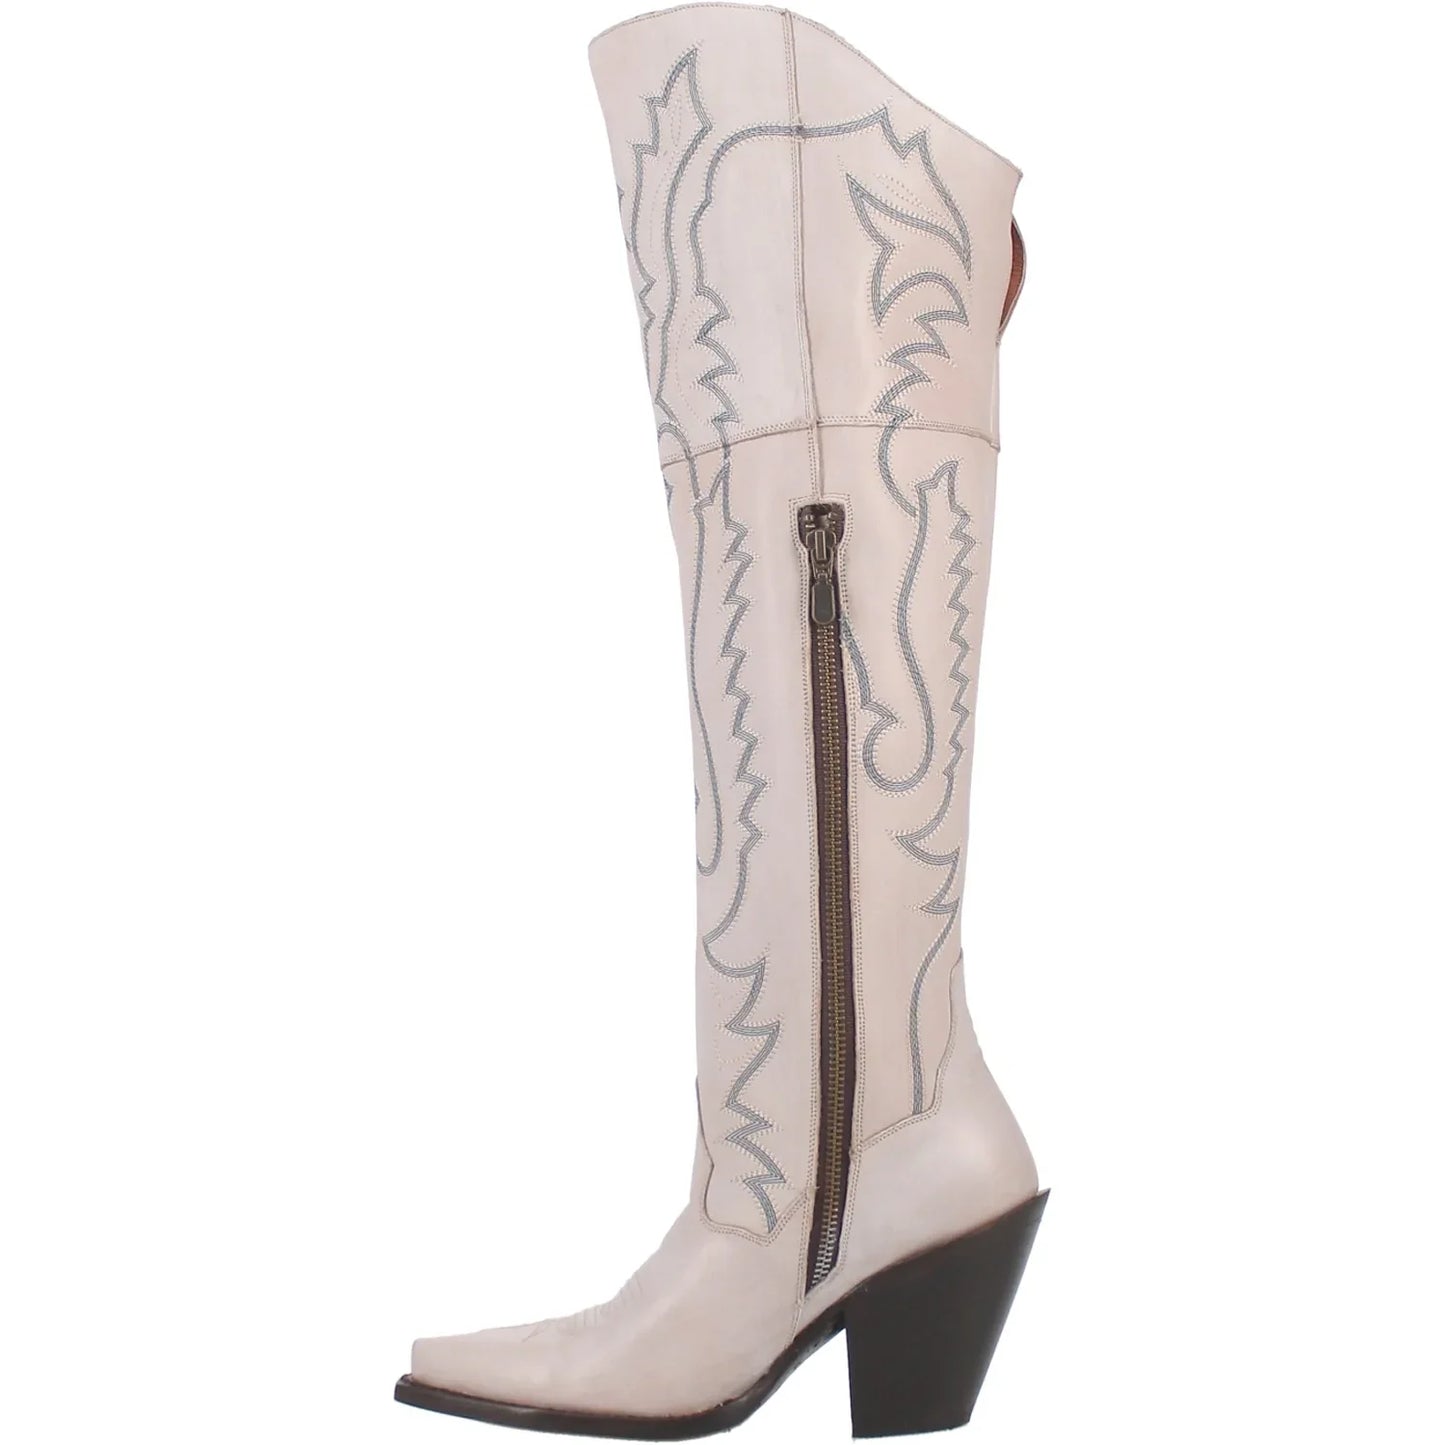 DAN POST Loverly Leather Boot White